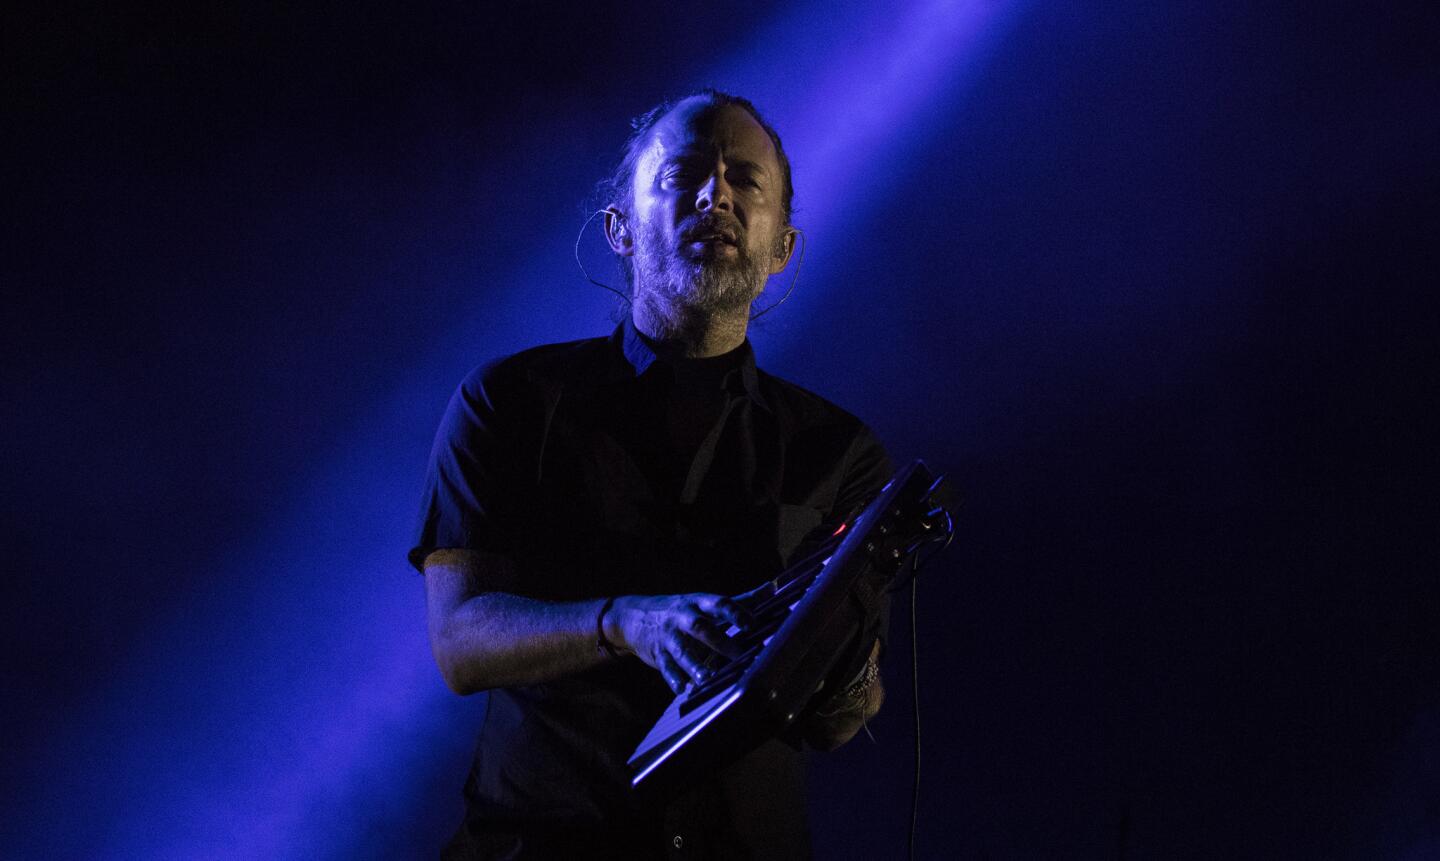 Radiohead's Thom Yorke onstage at the Coachella Valley Music and Arts Festival, 2017.